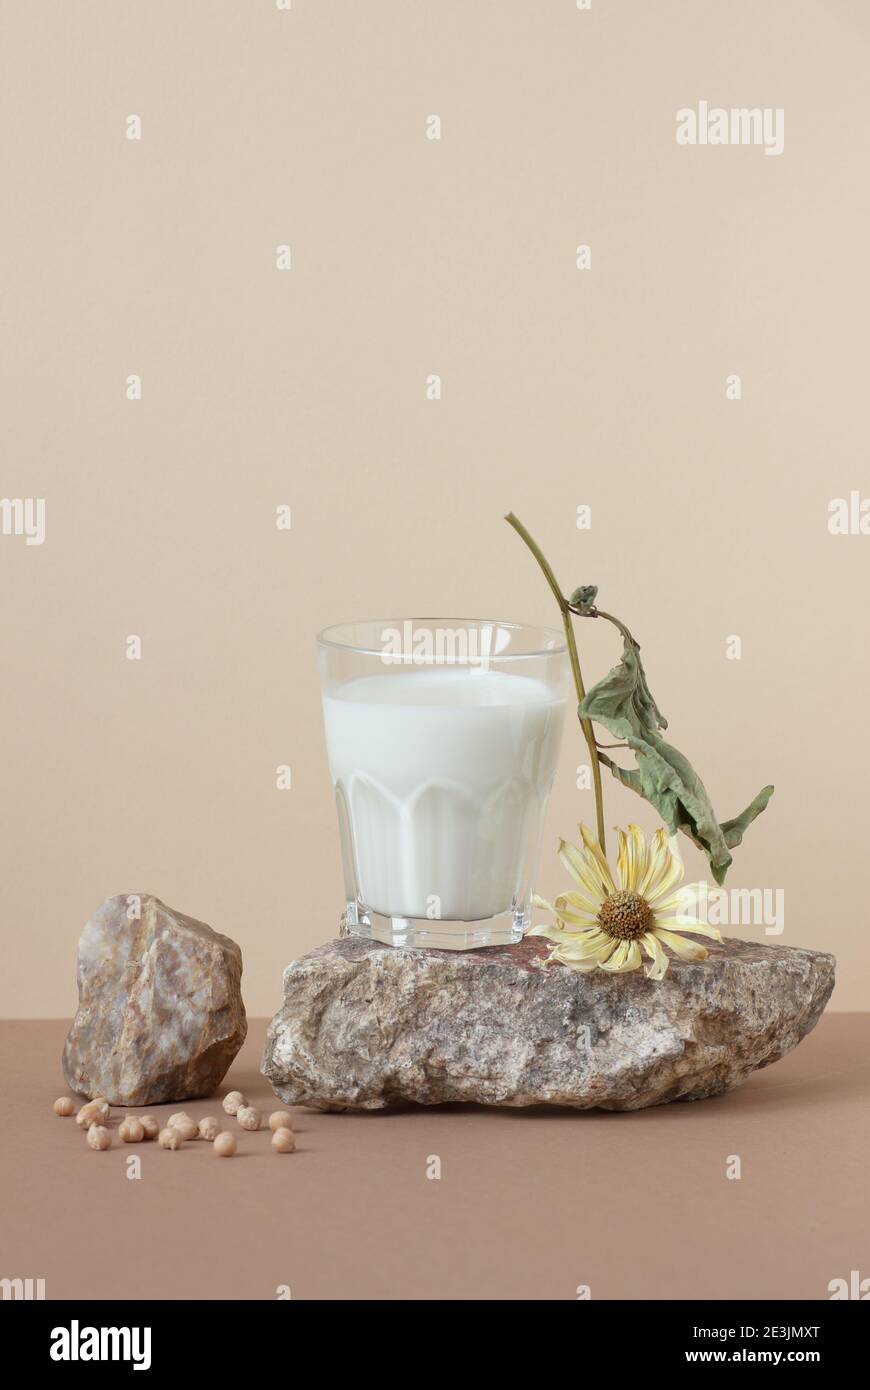 Vegan plant bean milk  from soy or pea, minimalist  composition with natural material stone, a glass with milk, dried sunflower and peas, copy space, Stock Photo